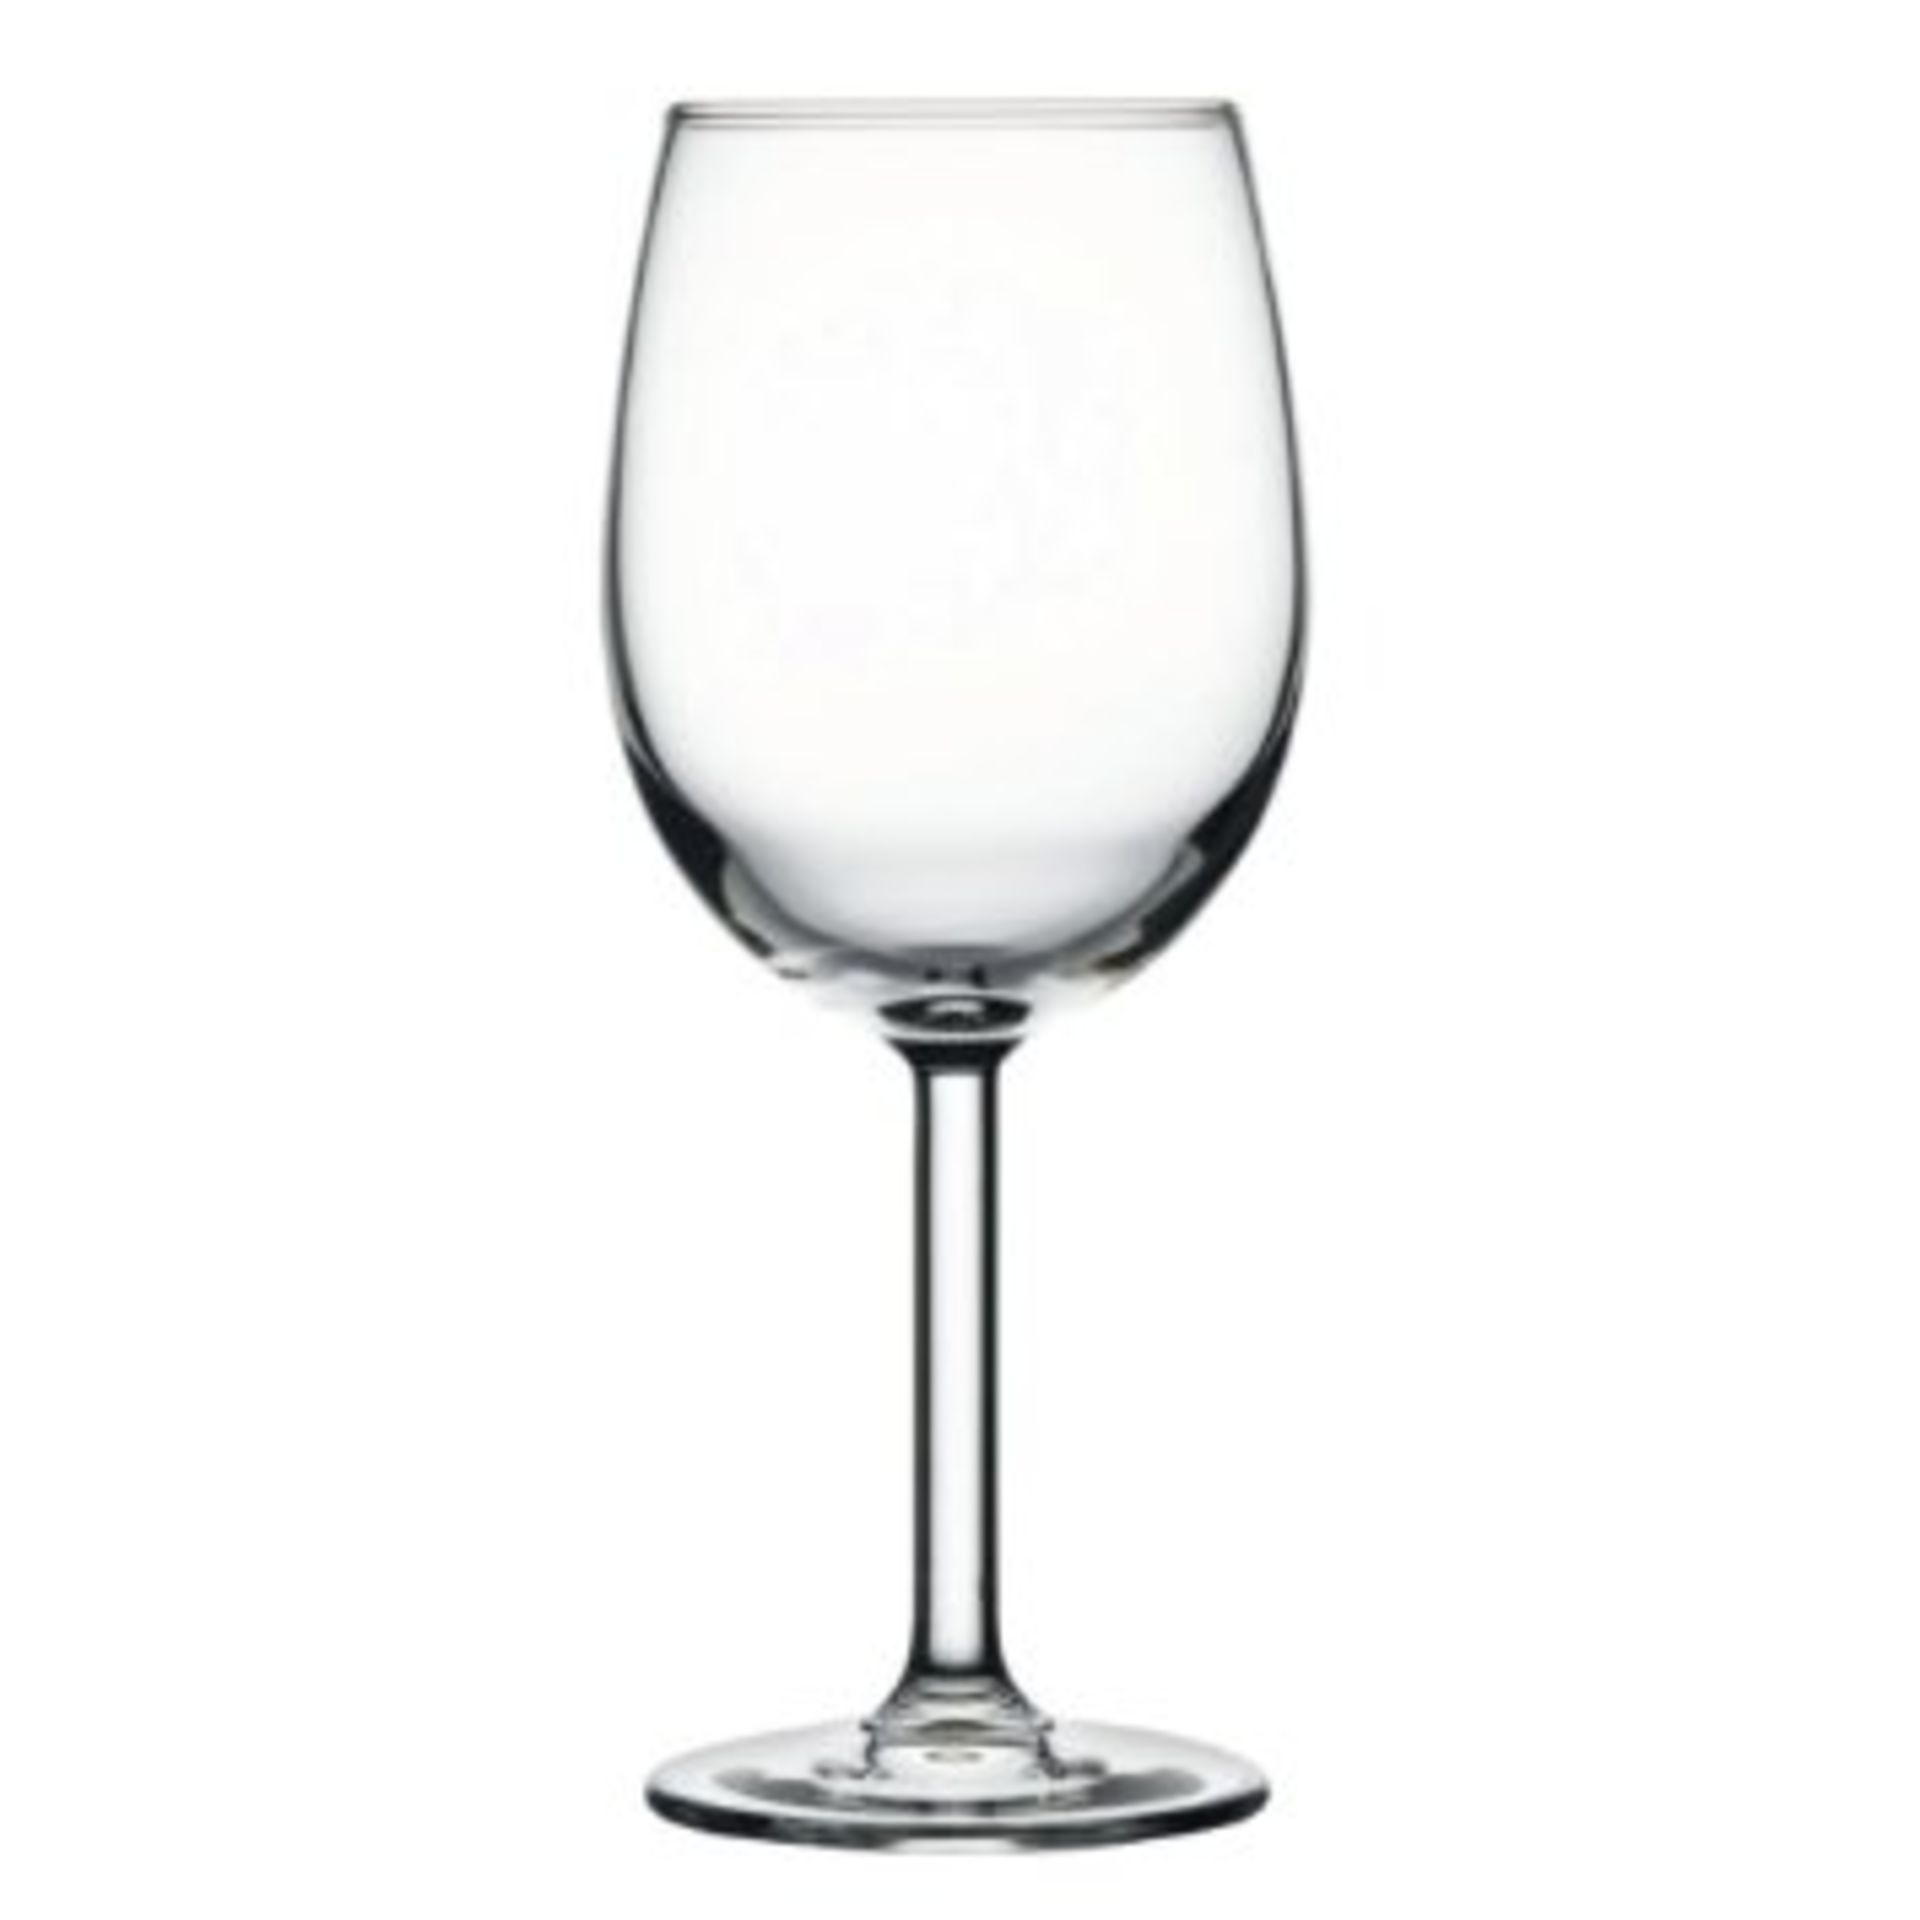 V Brand New 3 Piece Imperial White Wine Glass 198 ml X 2 Bid price to be multiplied by Two